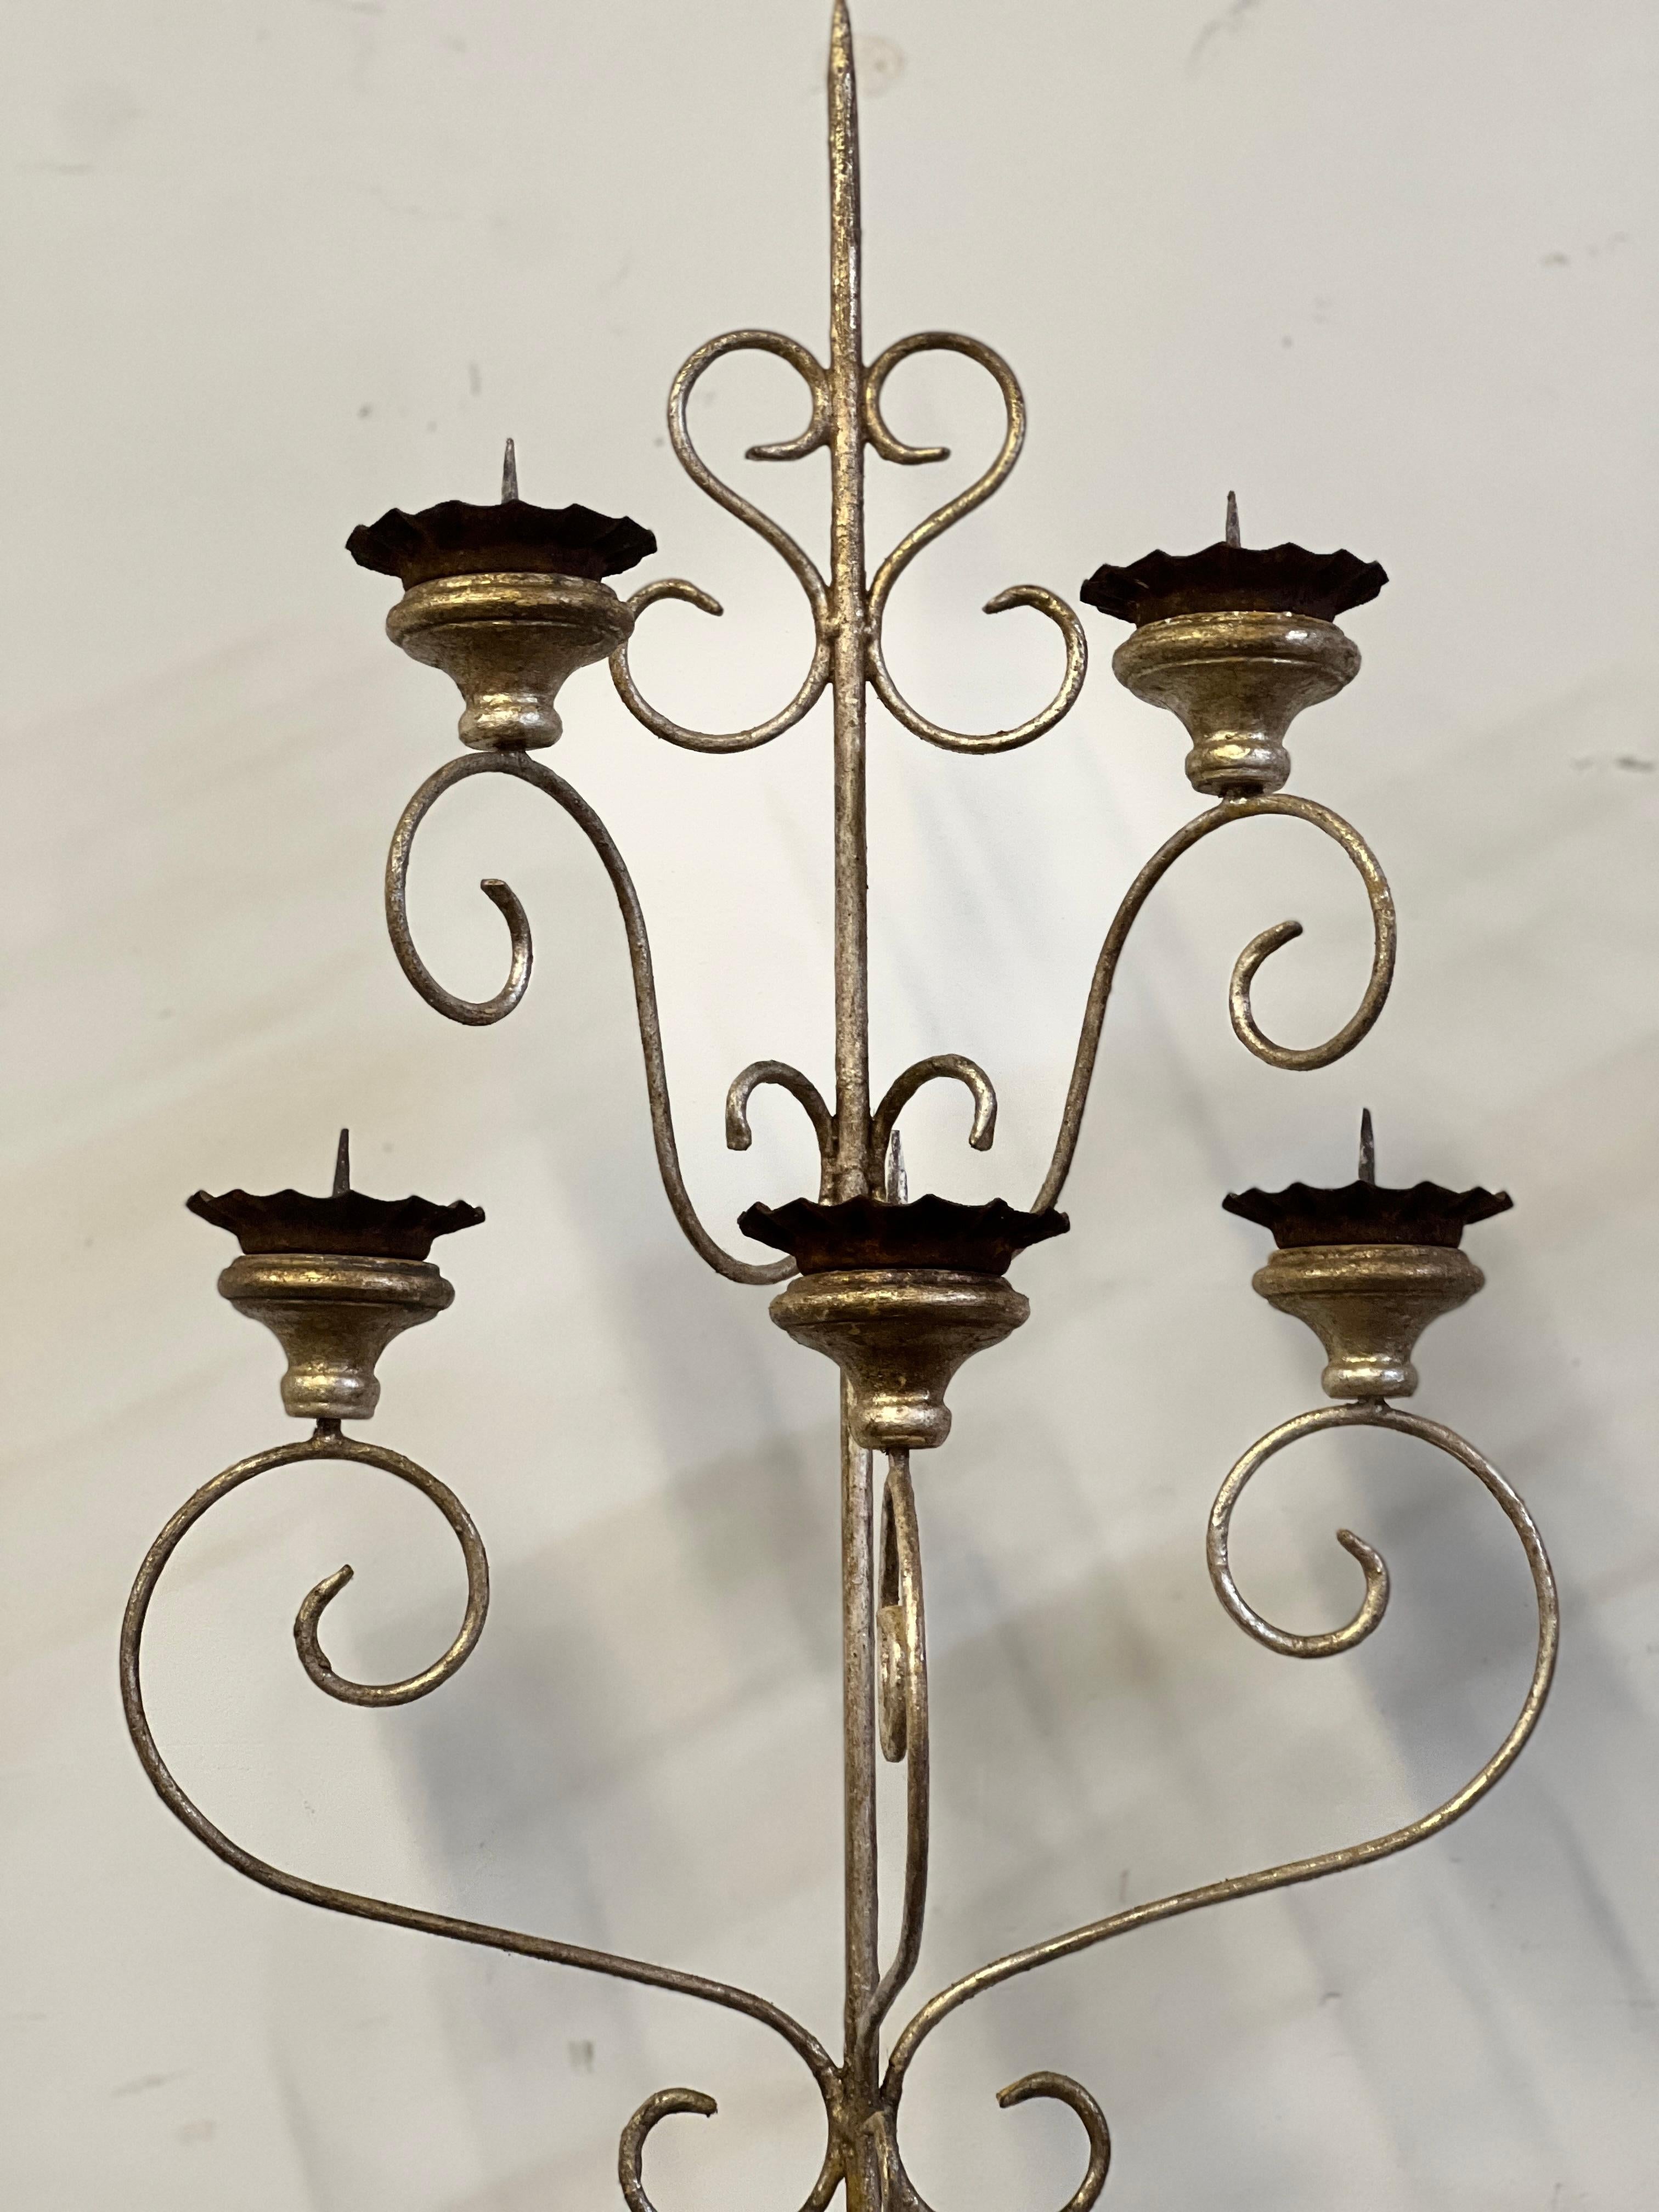 Unique and simple pair of silver gilt Italian 5 Arm Candle Wall Sconces that feature antique Italian bobeches. These are lightweight and are neutral toned making them perfect for many spaces. This pair comes with custom made backplates to help for